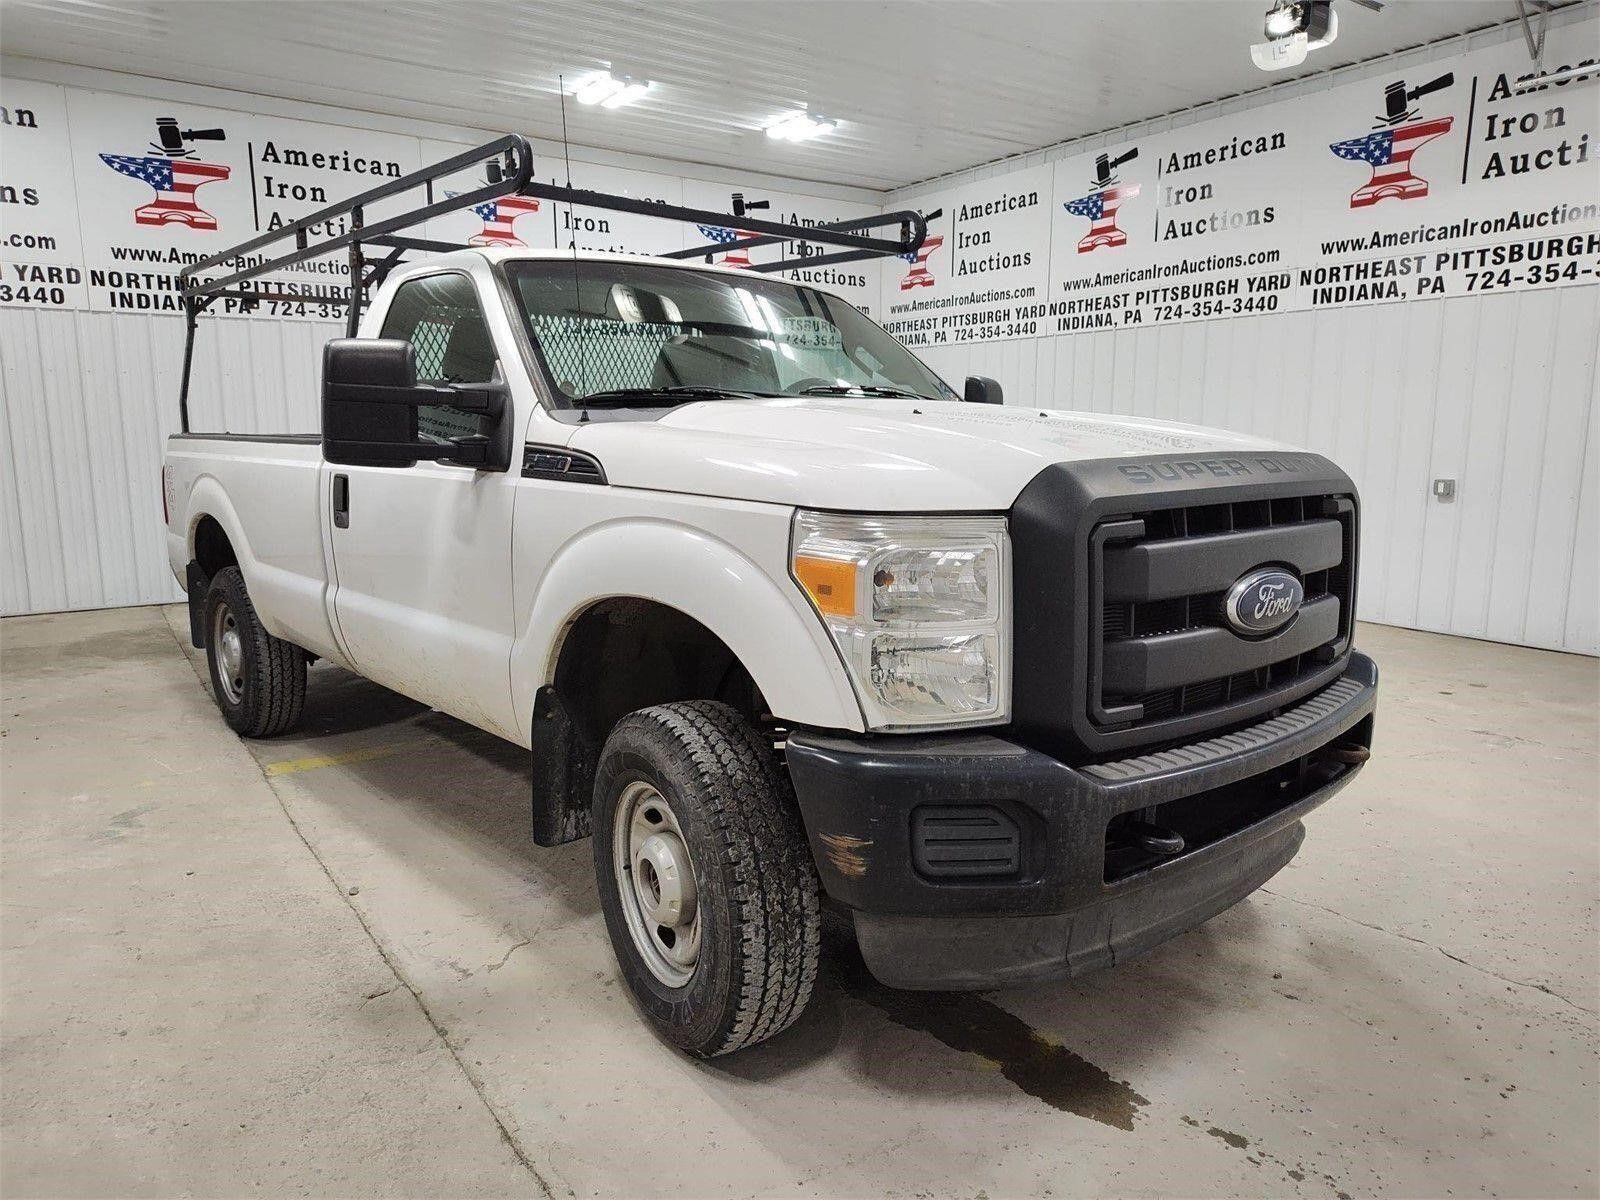 2012 Ford F250 Truck- Titled